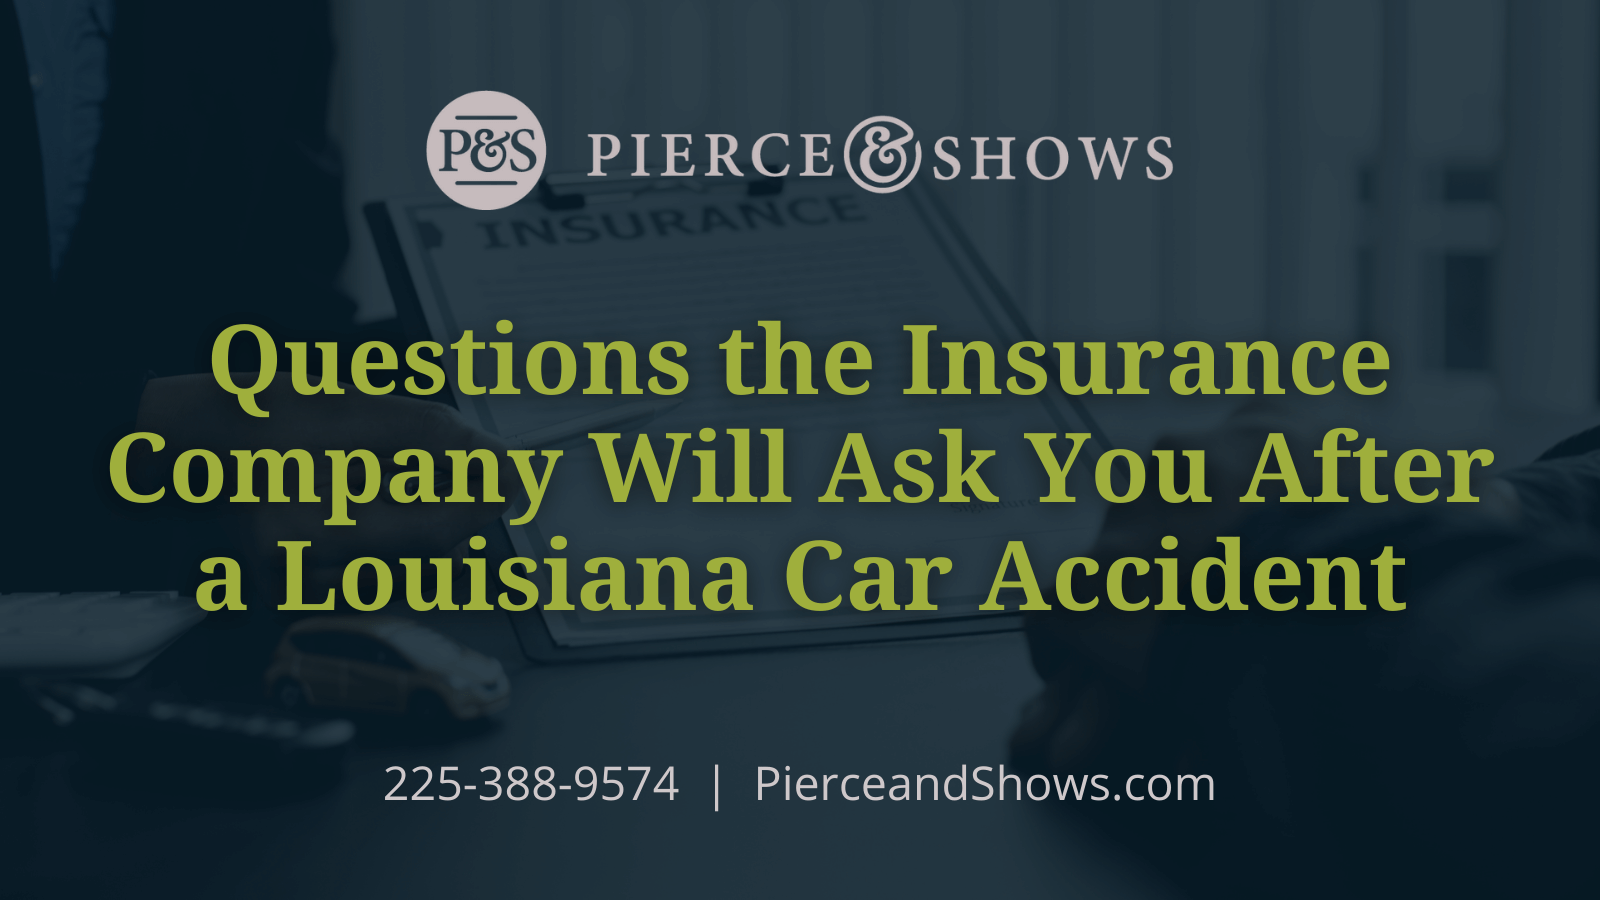 Questions the Insurance Company Will Ask You After a Louisiana Car Accident - Baton Rouge Louisiana injury attorney Pierce & Shows